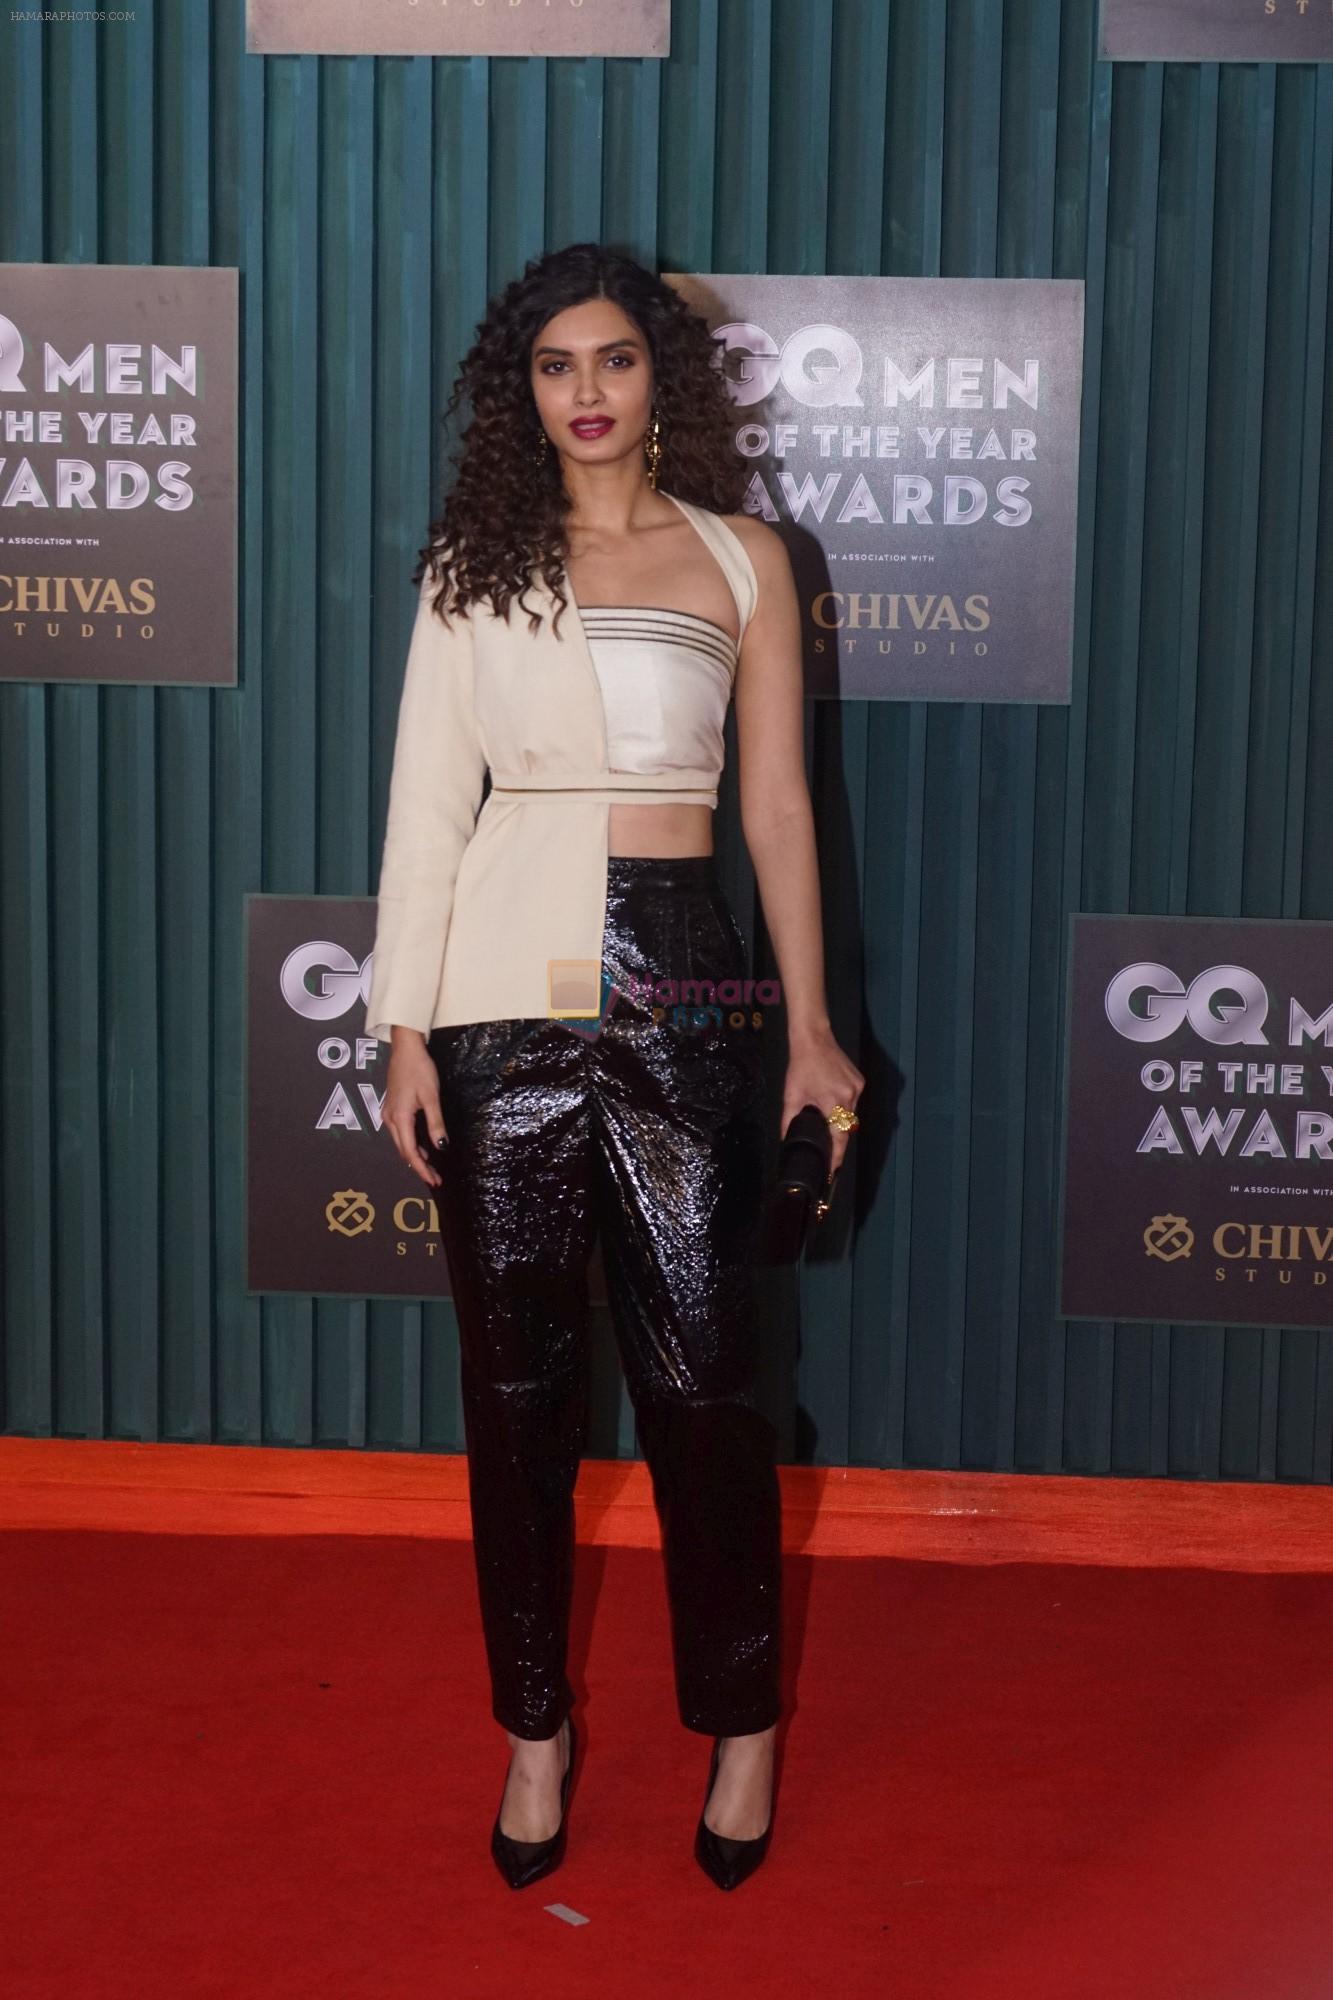 Diana Penty at GQ Men of the Year Awards 2018 on 27th Sept 2018